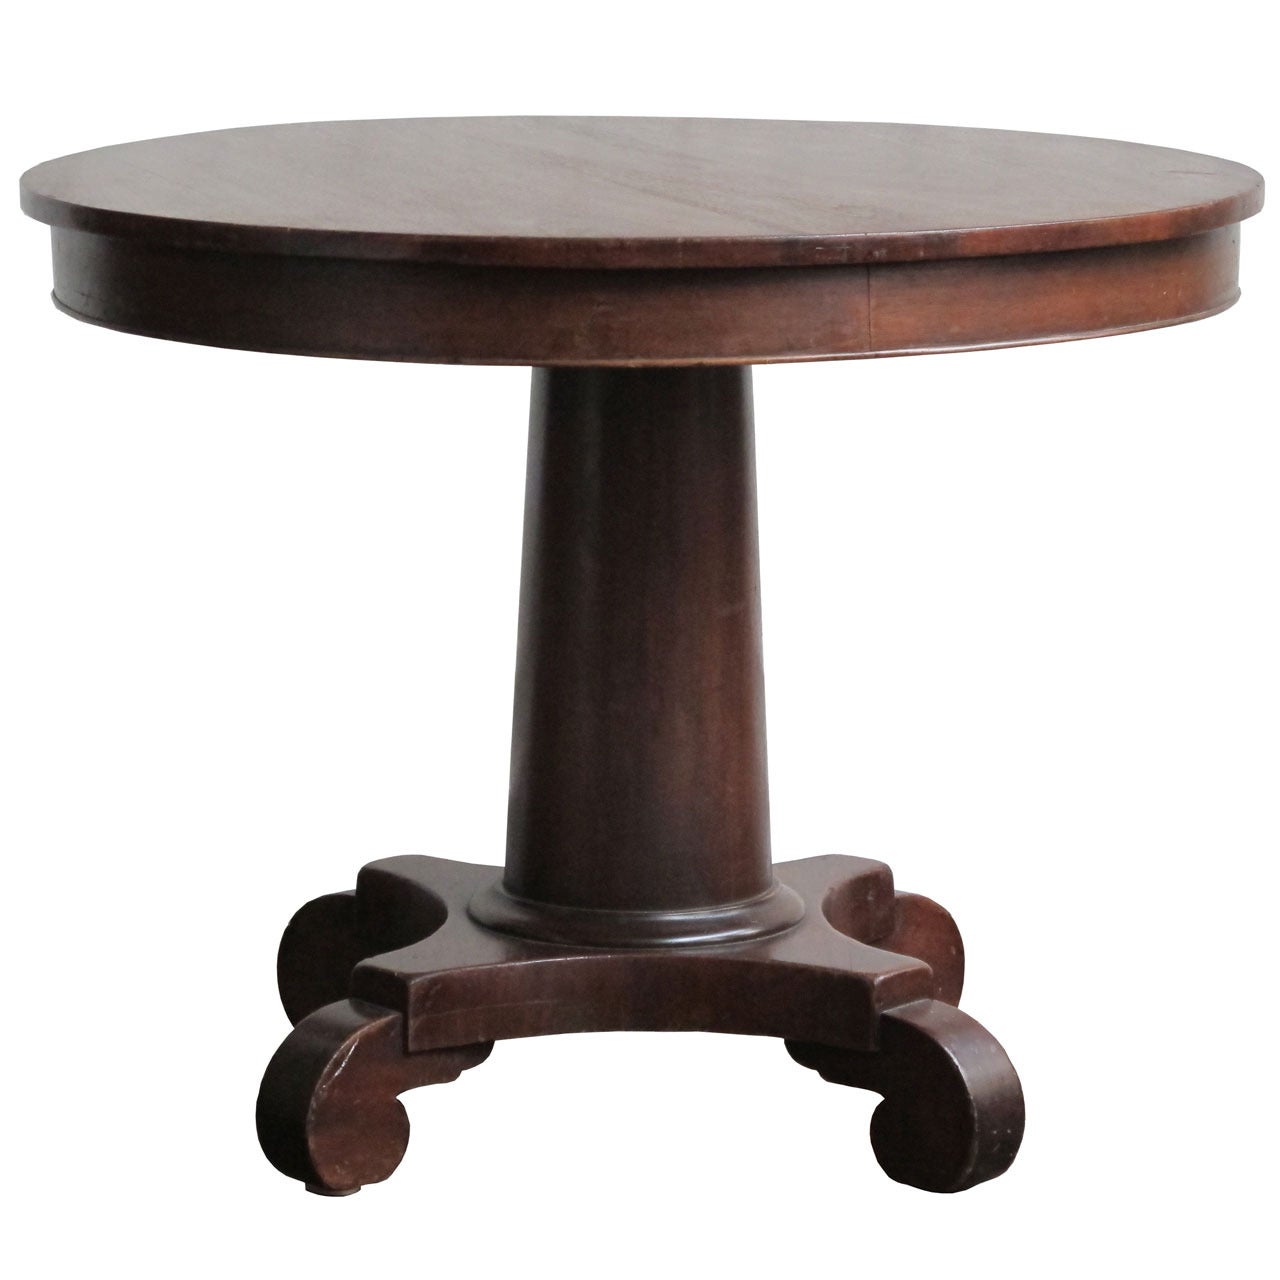 Late 19th Century American Empire Revival Pedestal Table